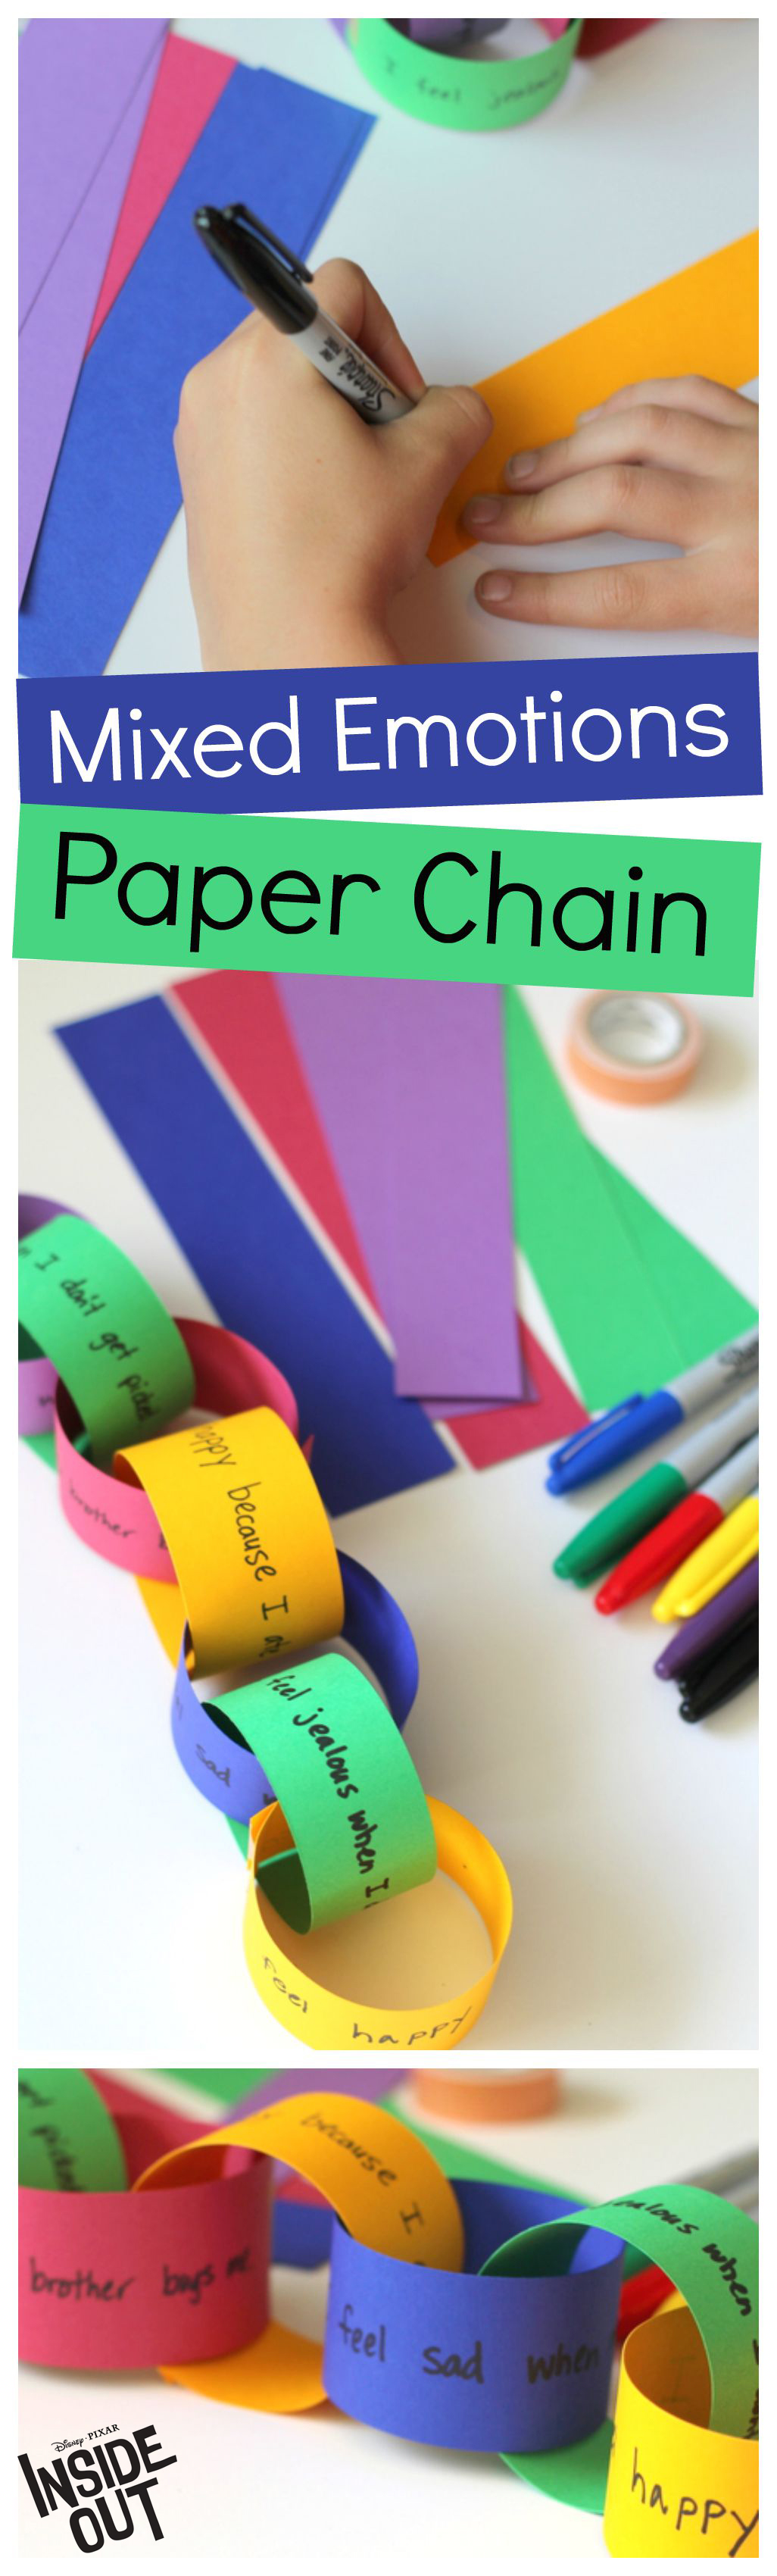 Mixed Emotions Paper Chain 